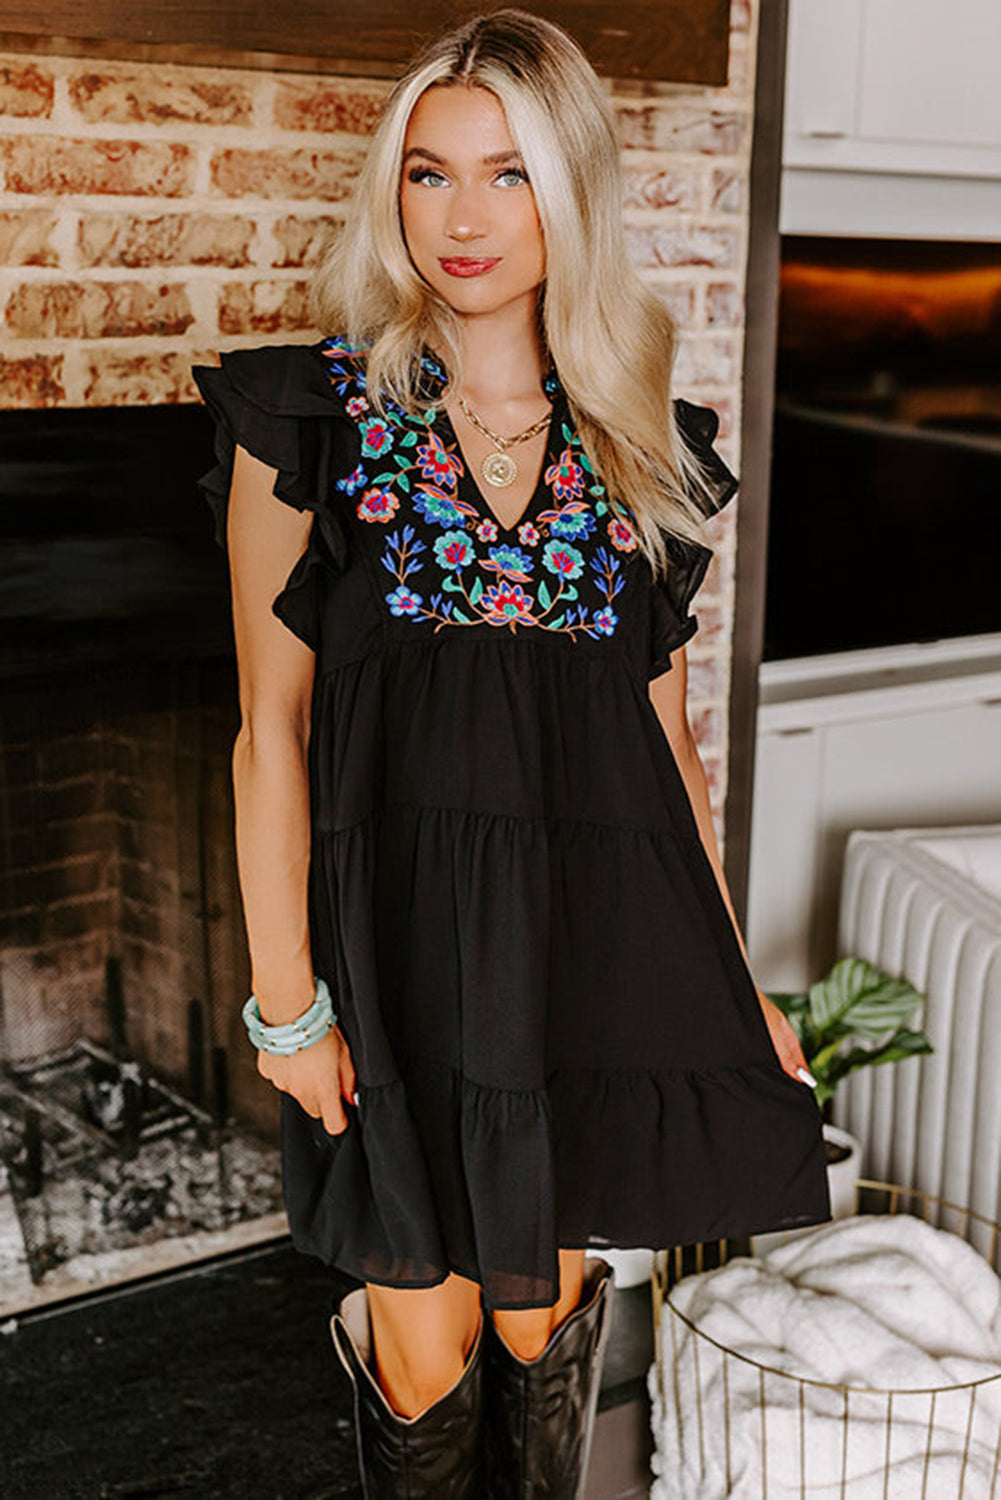 Black Floral Embroidered Tiered Ruffled Mini Dress